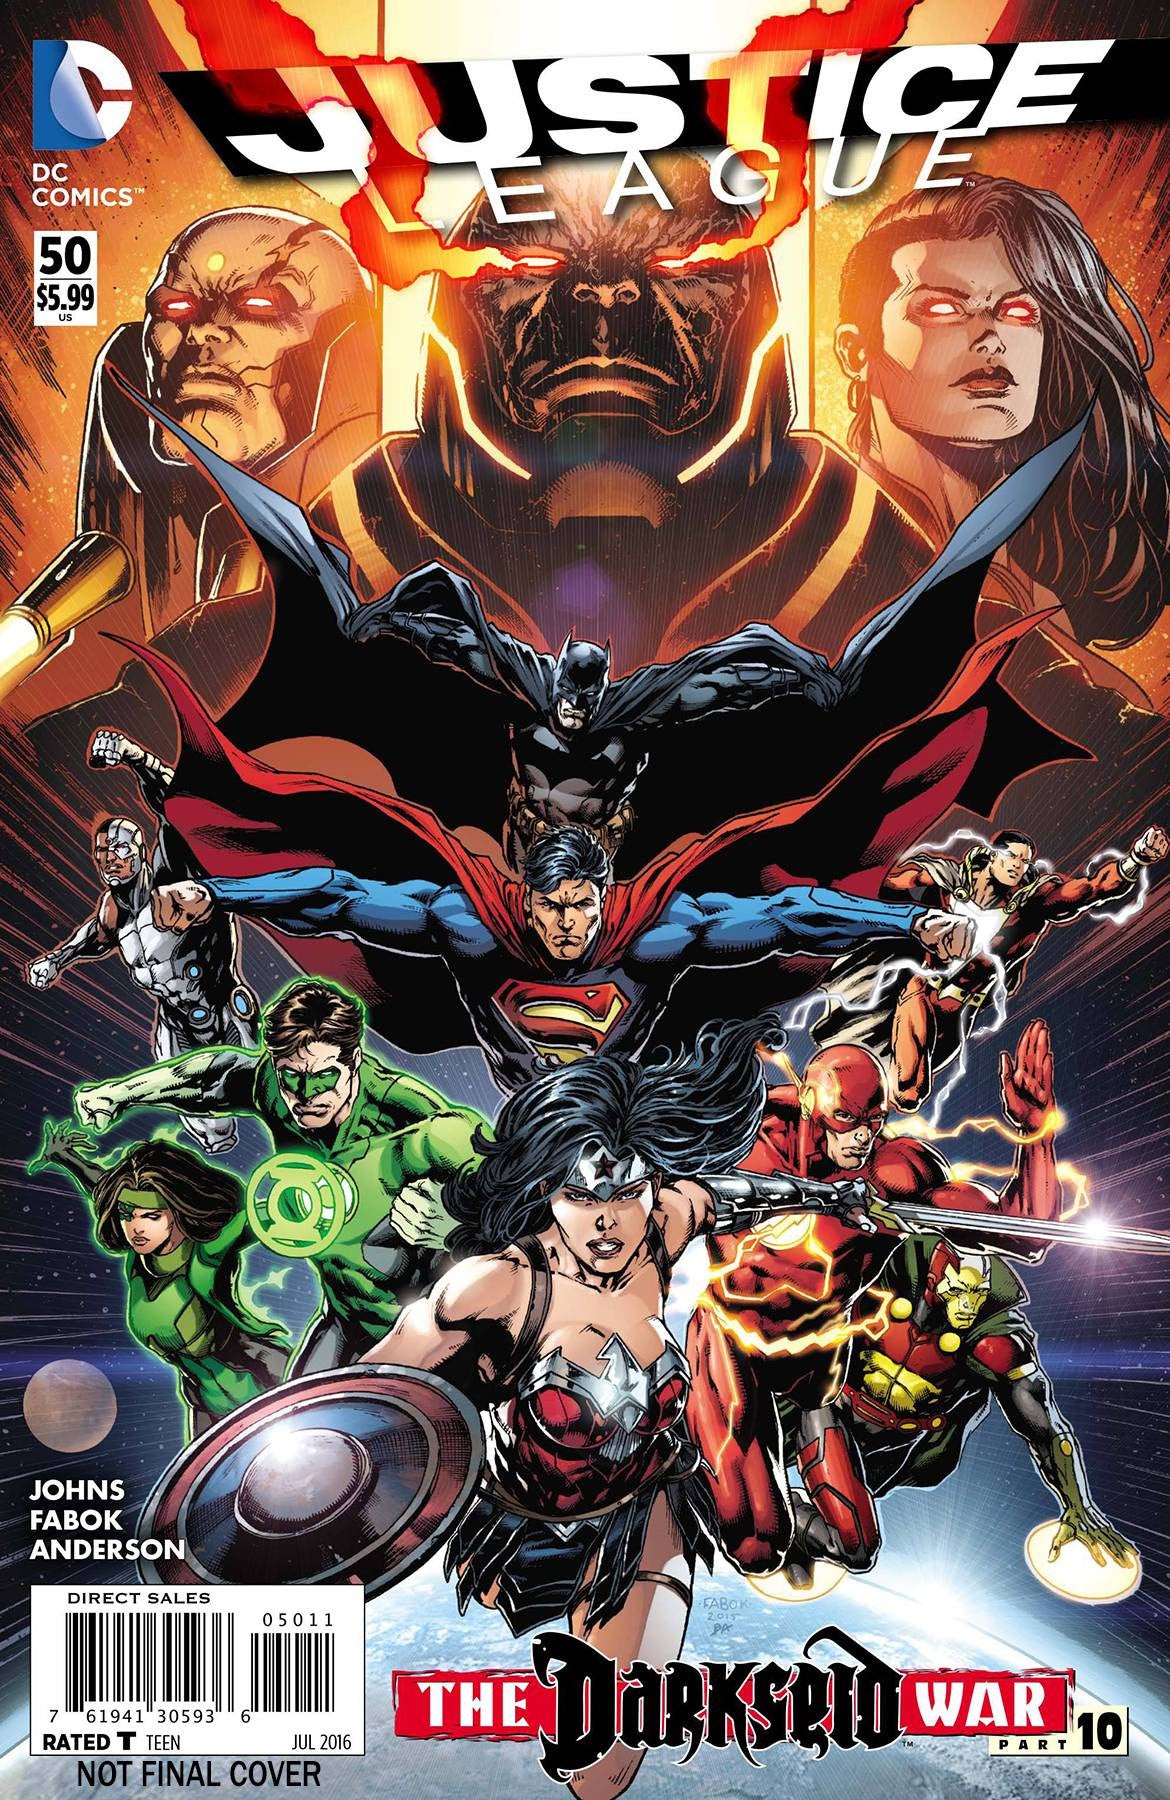 JUSTICE LEAGUE #50 2ND PTG COVER